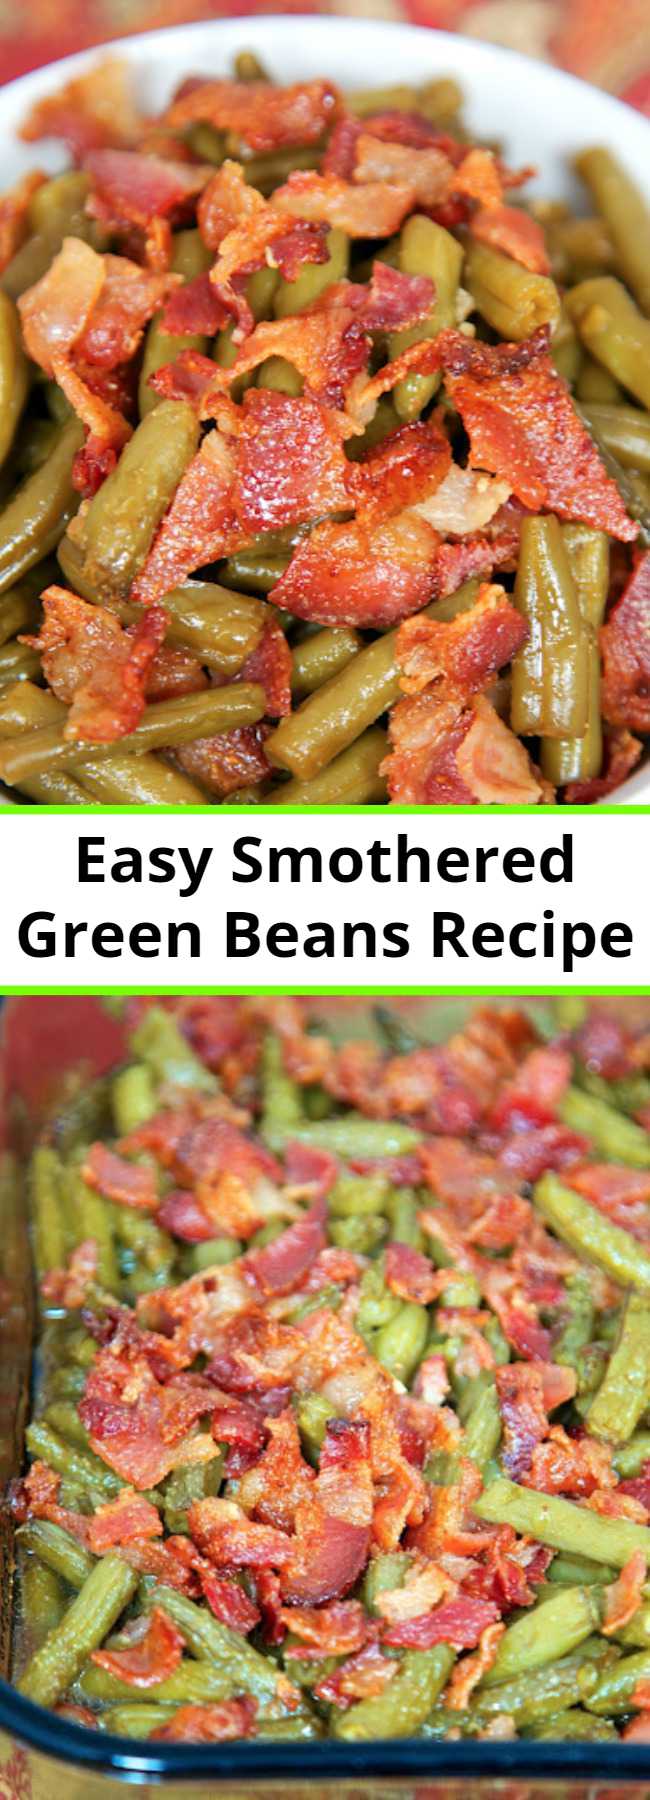 Easy Smothered Green Beans Recipe - Canned green beans baked in bacon, brown sugar, butter, soy sauce, and garlic. This is the most requested green bean recipe in our house. Everybody gets seconds. SO good!! Great for a potluck. Everyone asks for the recipe! Super easy to make.